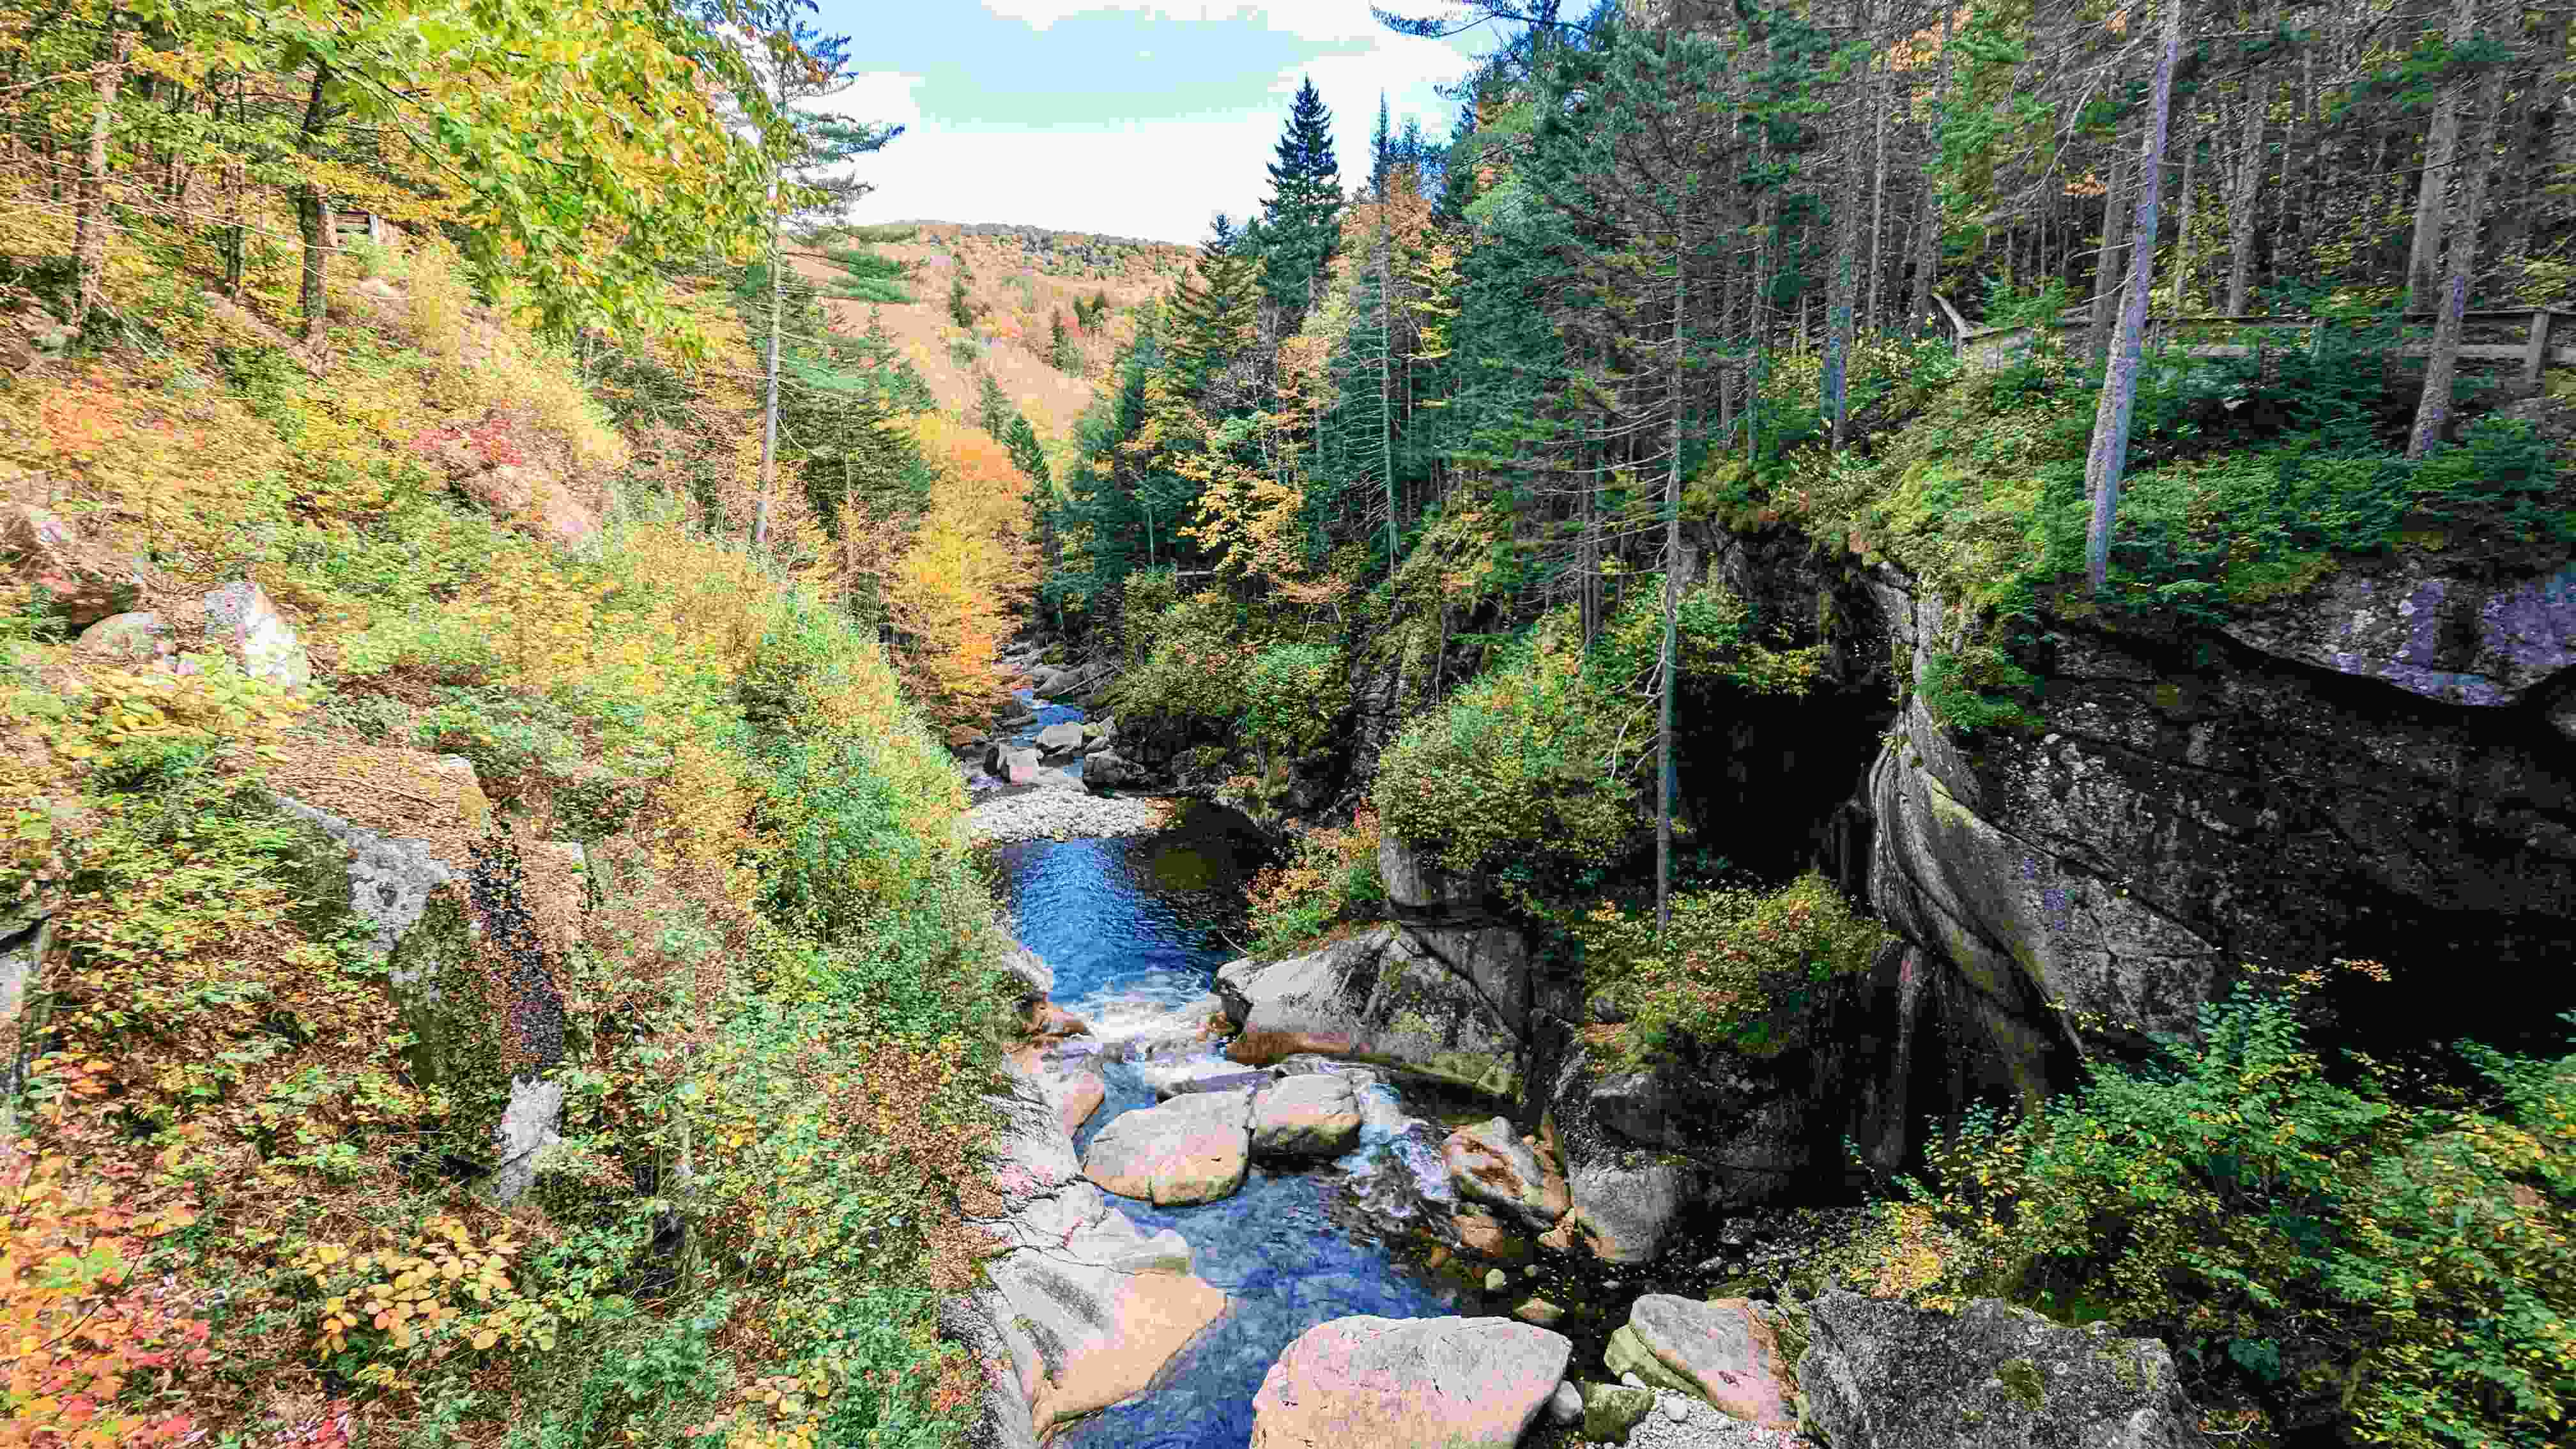 An overview photo of fall foliage and a stream